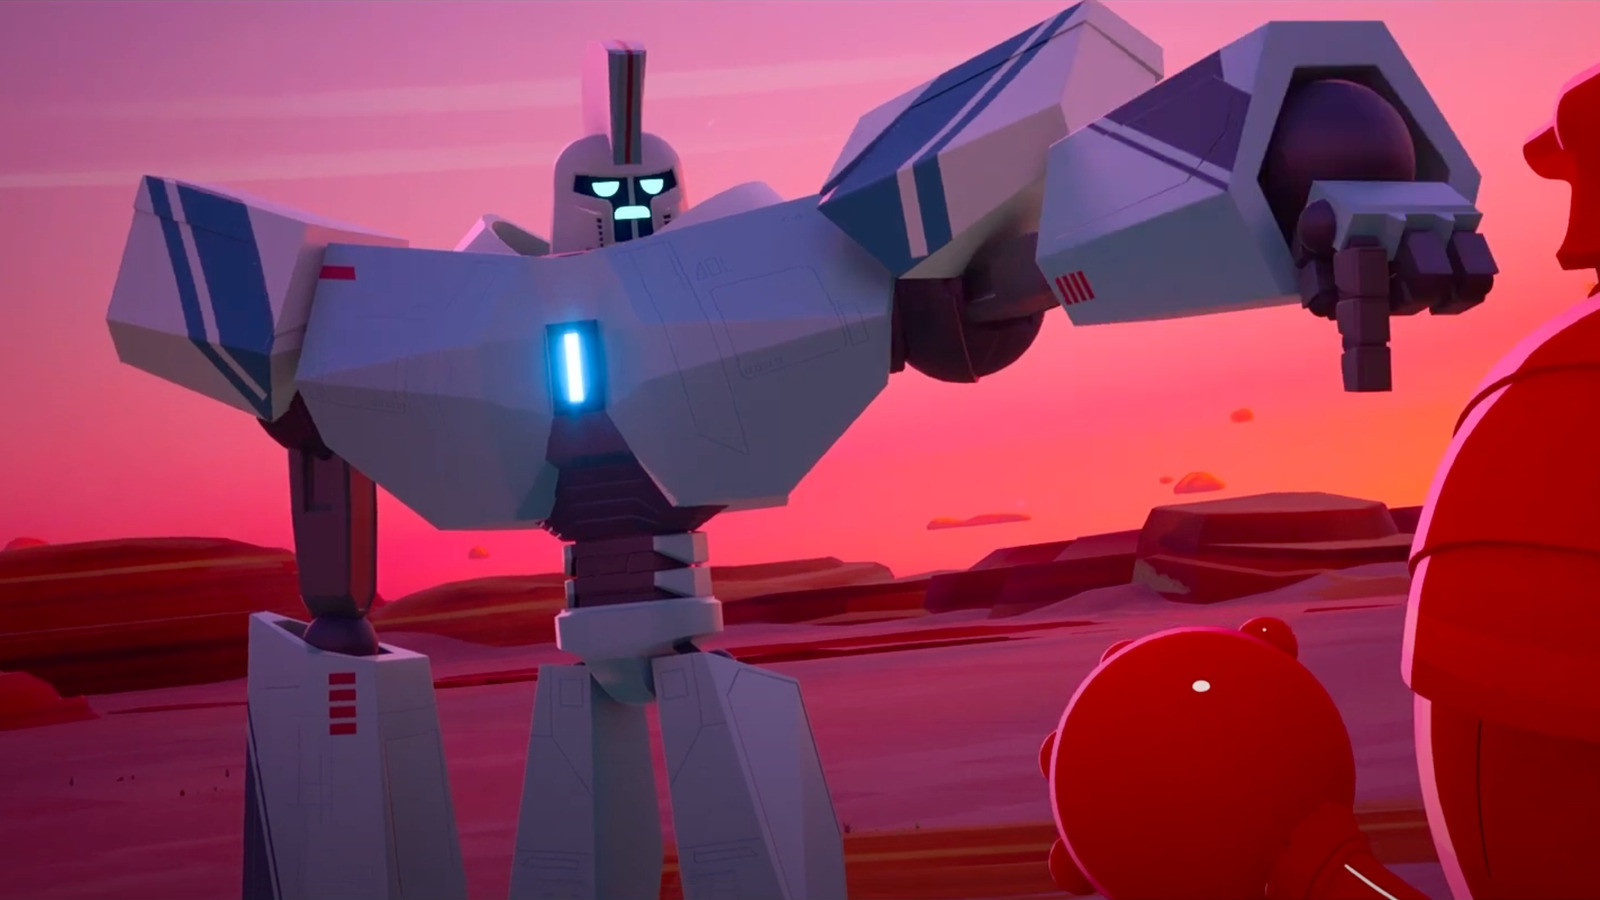 Exclusive Q&A: Building 'Super Giant Robot Brothers' with Reel FX